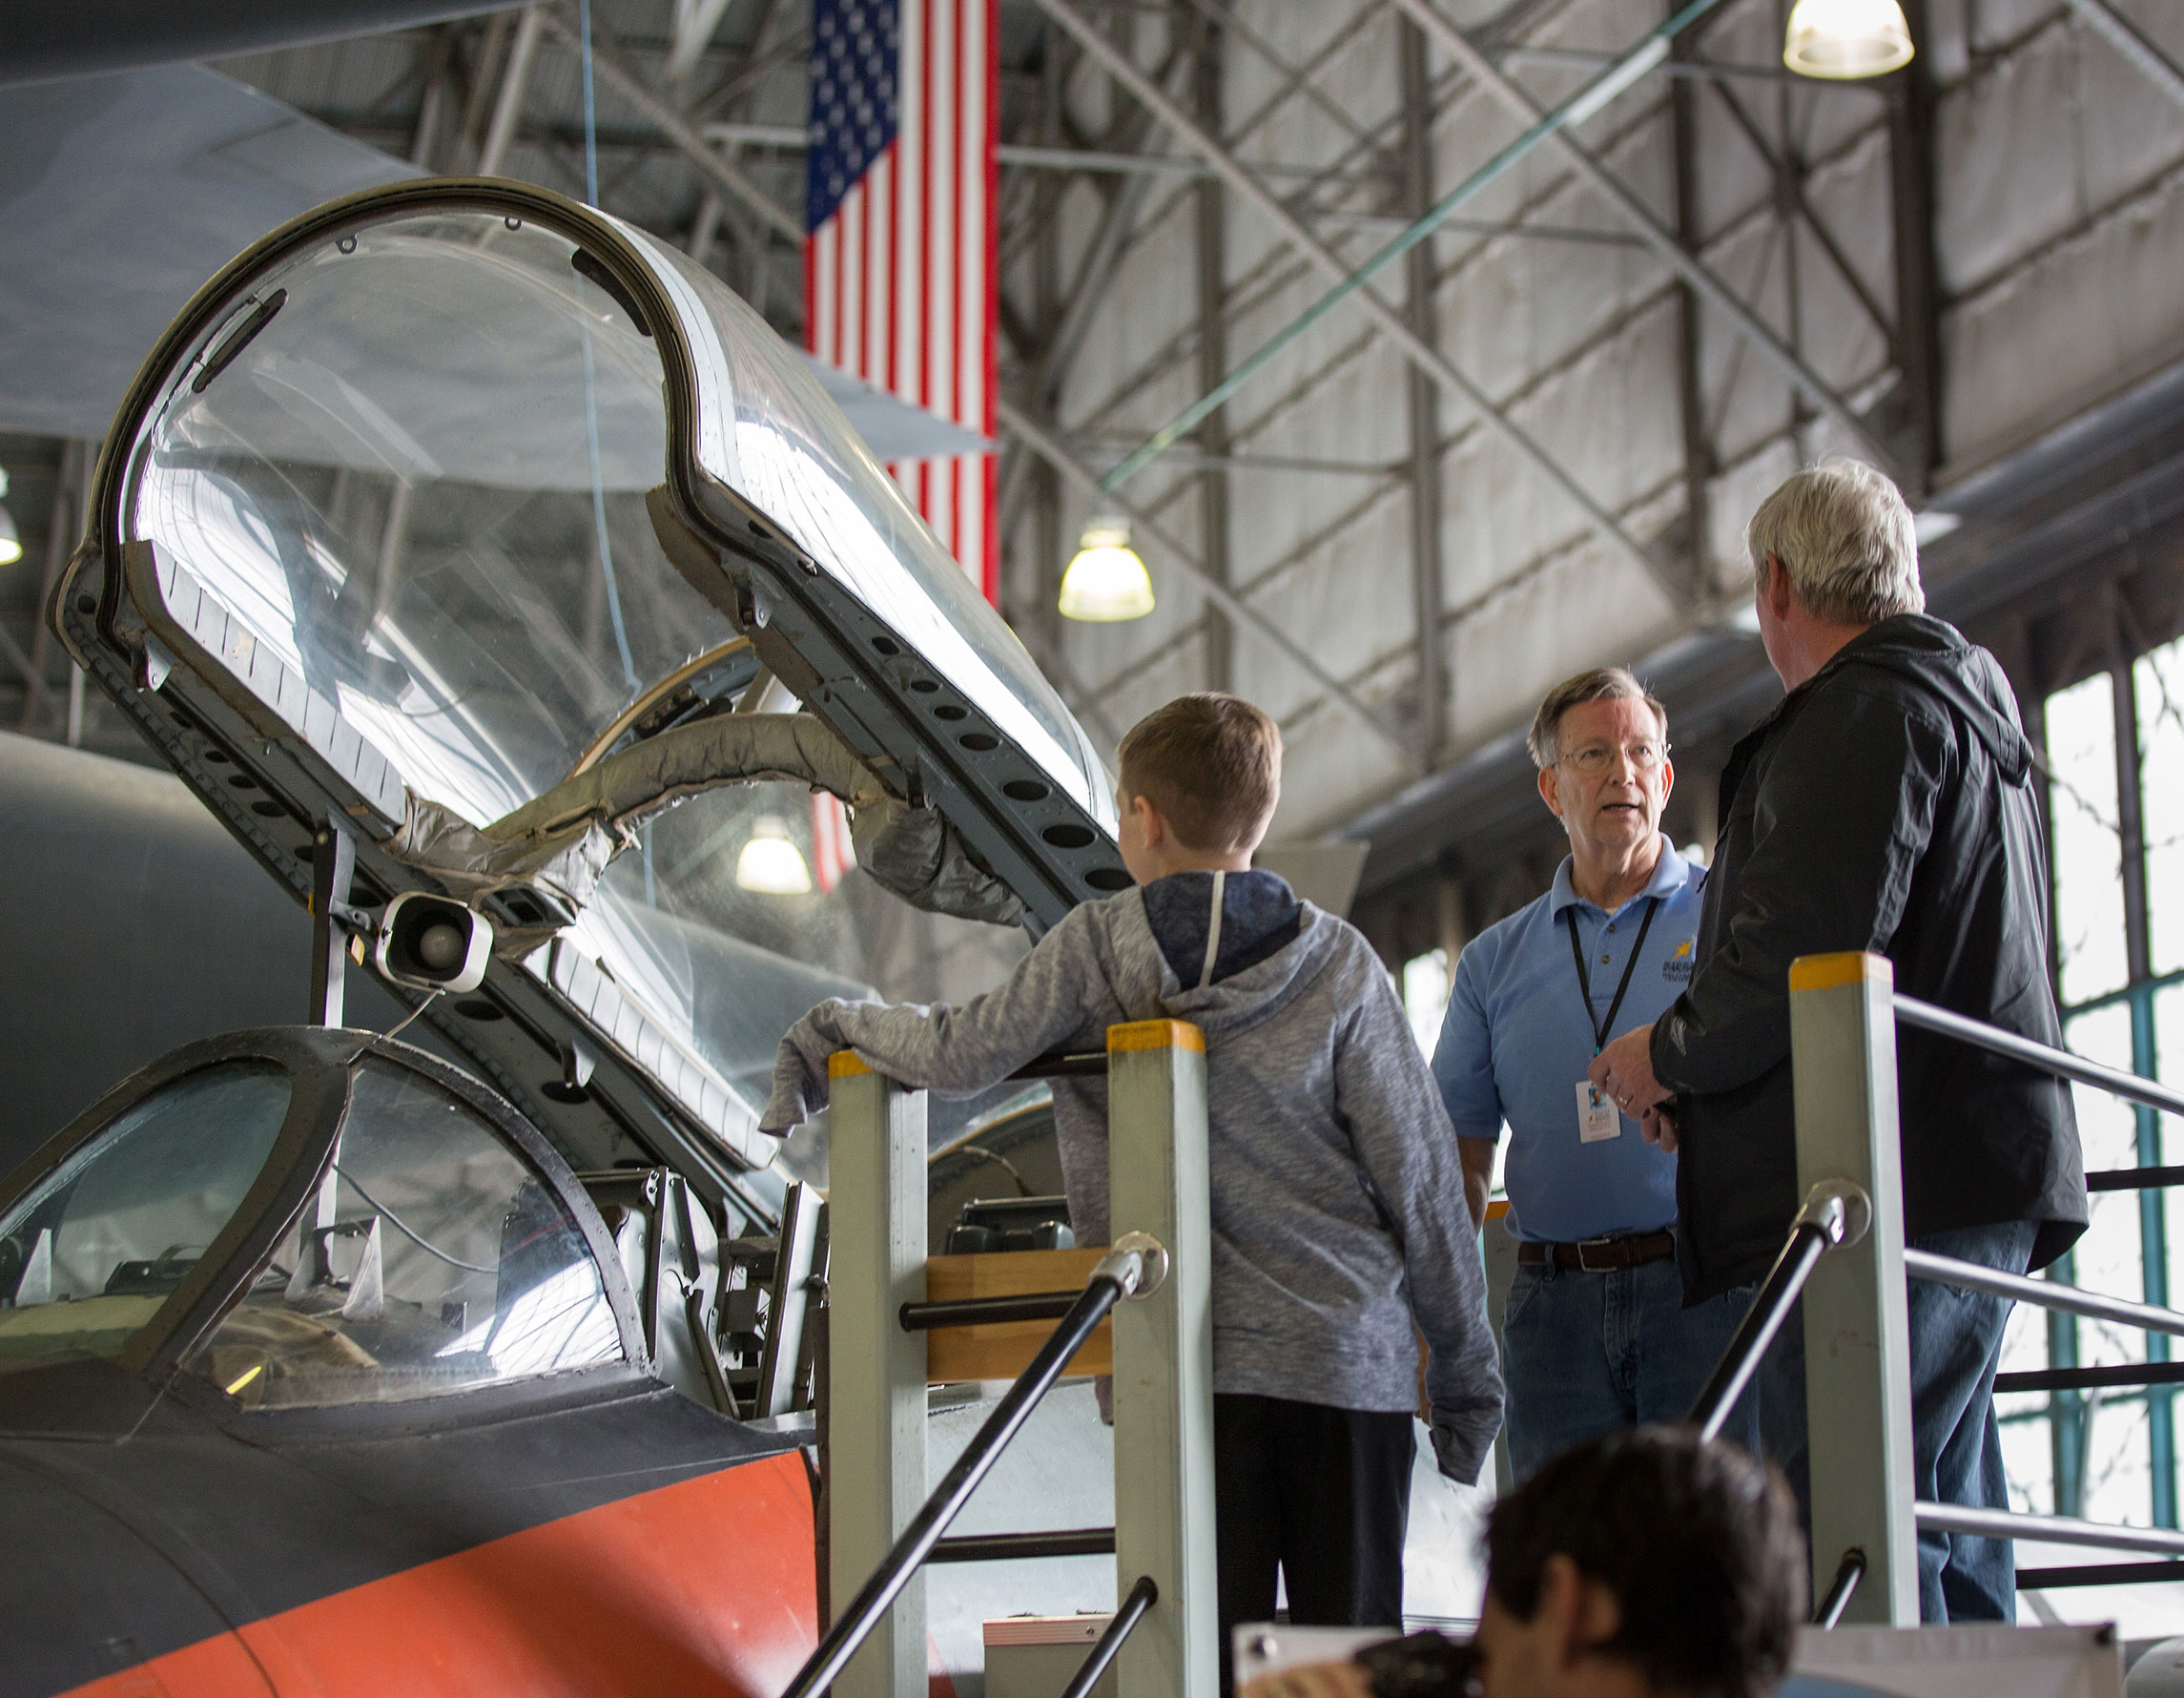 Guests talk with a volunteer at an open cockpit